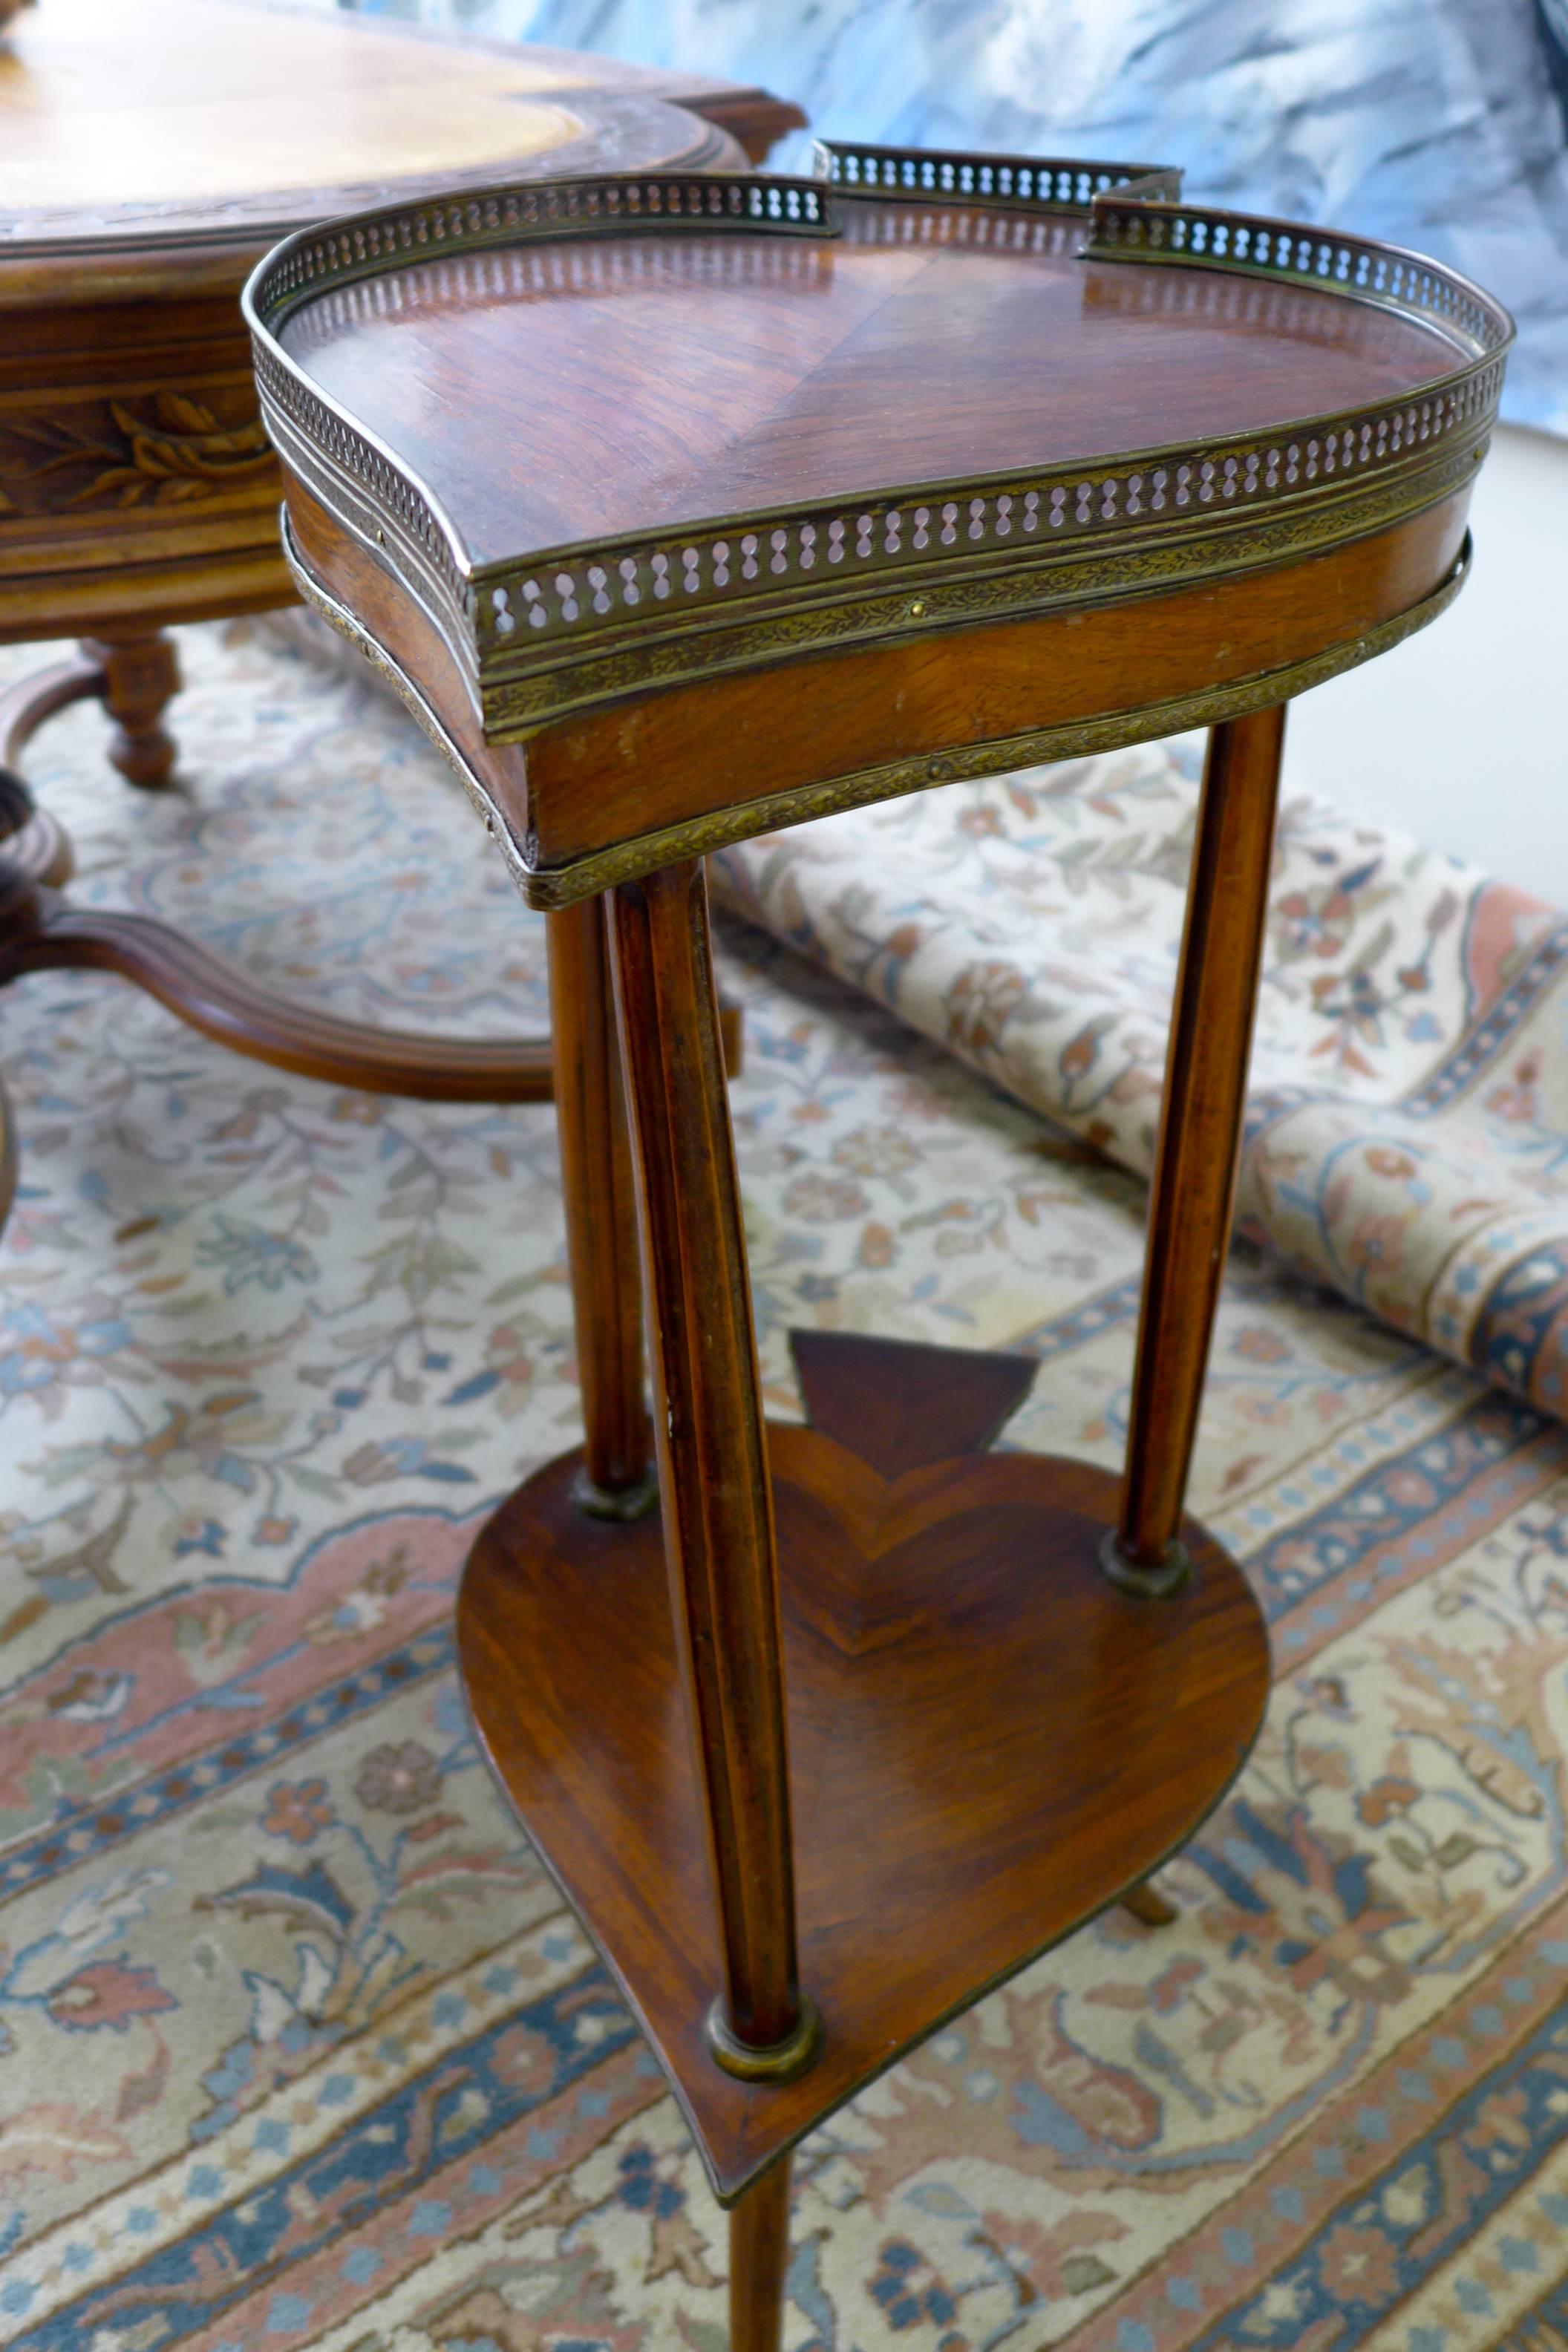 A rare 19th century mahogany spade shape tripod side table on two levels. Very elegant legs and nice glided brass surroundings on both levels, 
circa 1830.